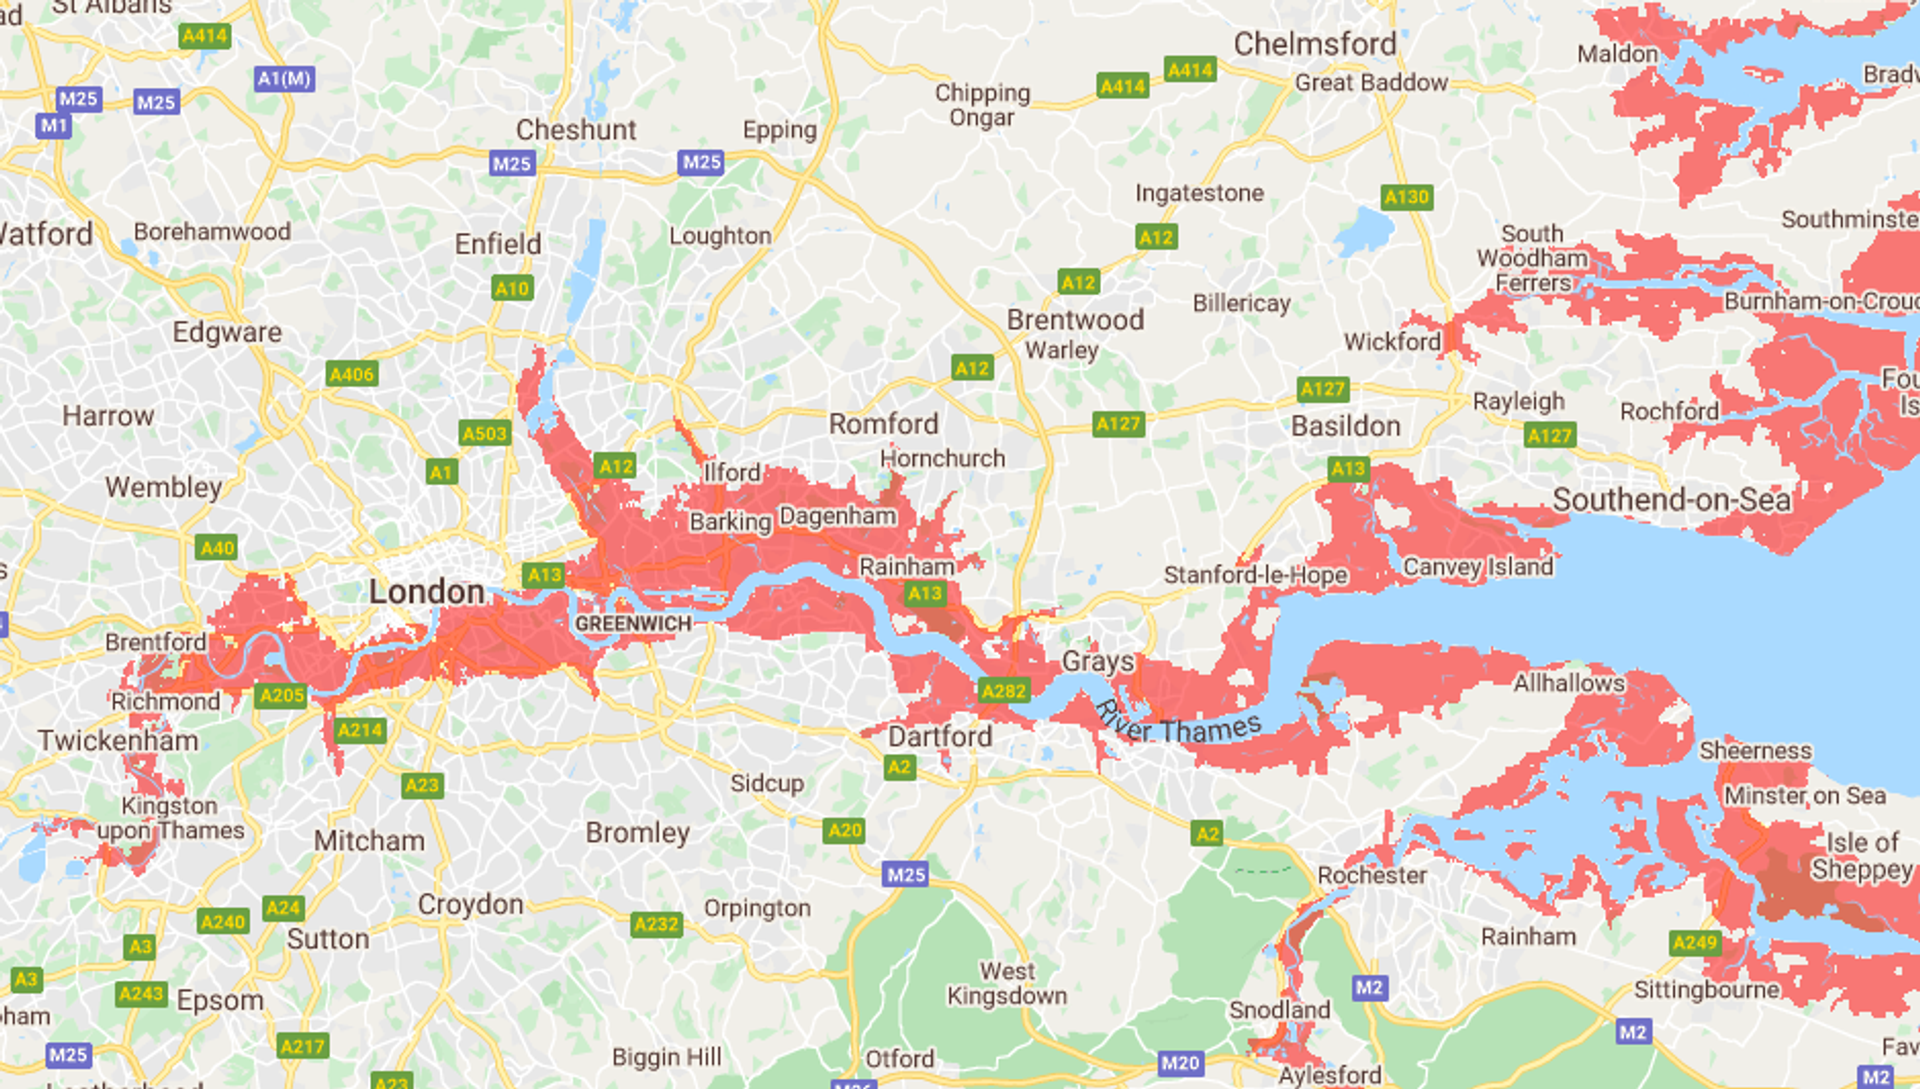 Areas in London that are at risk of staying submerged by 2030, according to a Climate Central interactive map - Sputnik International, 1920, 07.09.2021